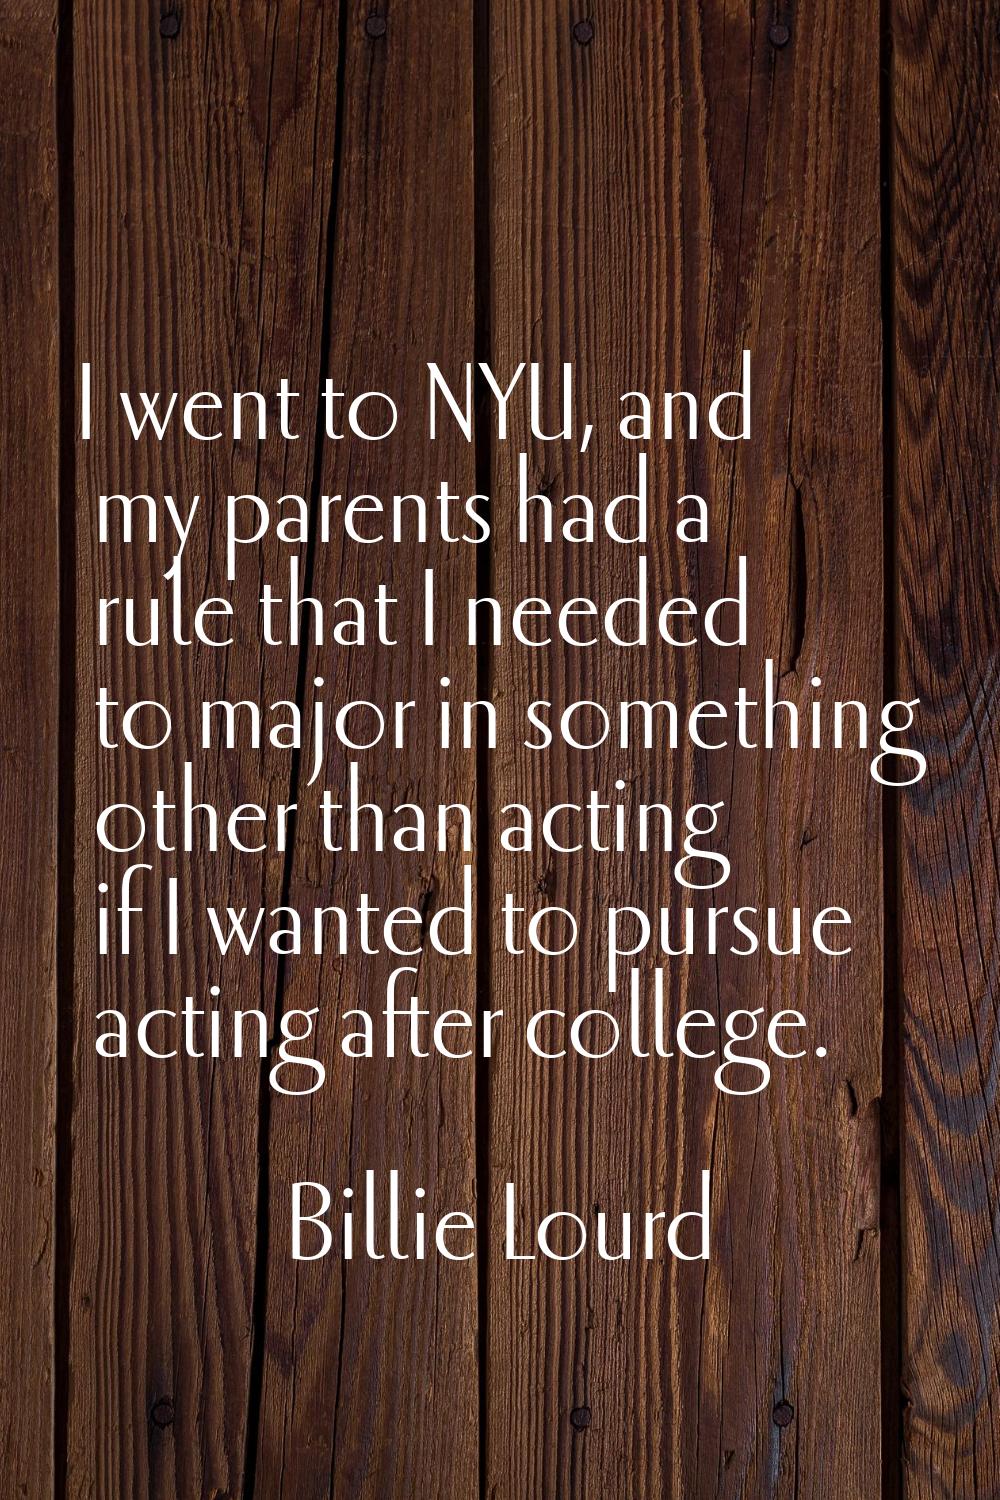 I went to NYU, and my parents had a rule that I needed to major in something other than acting if I